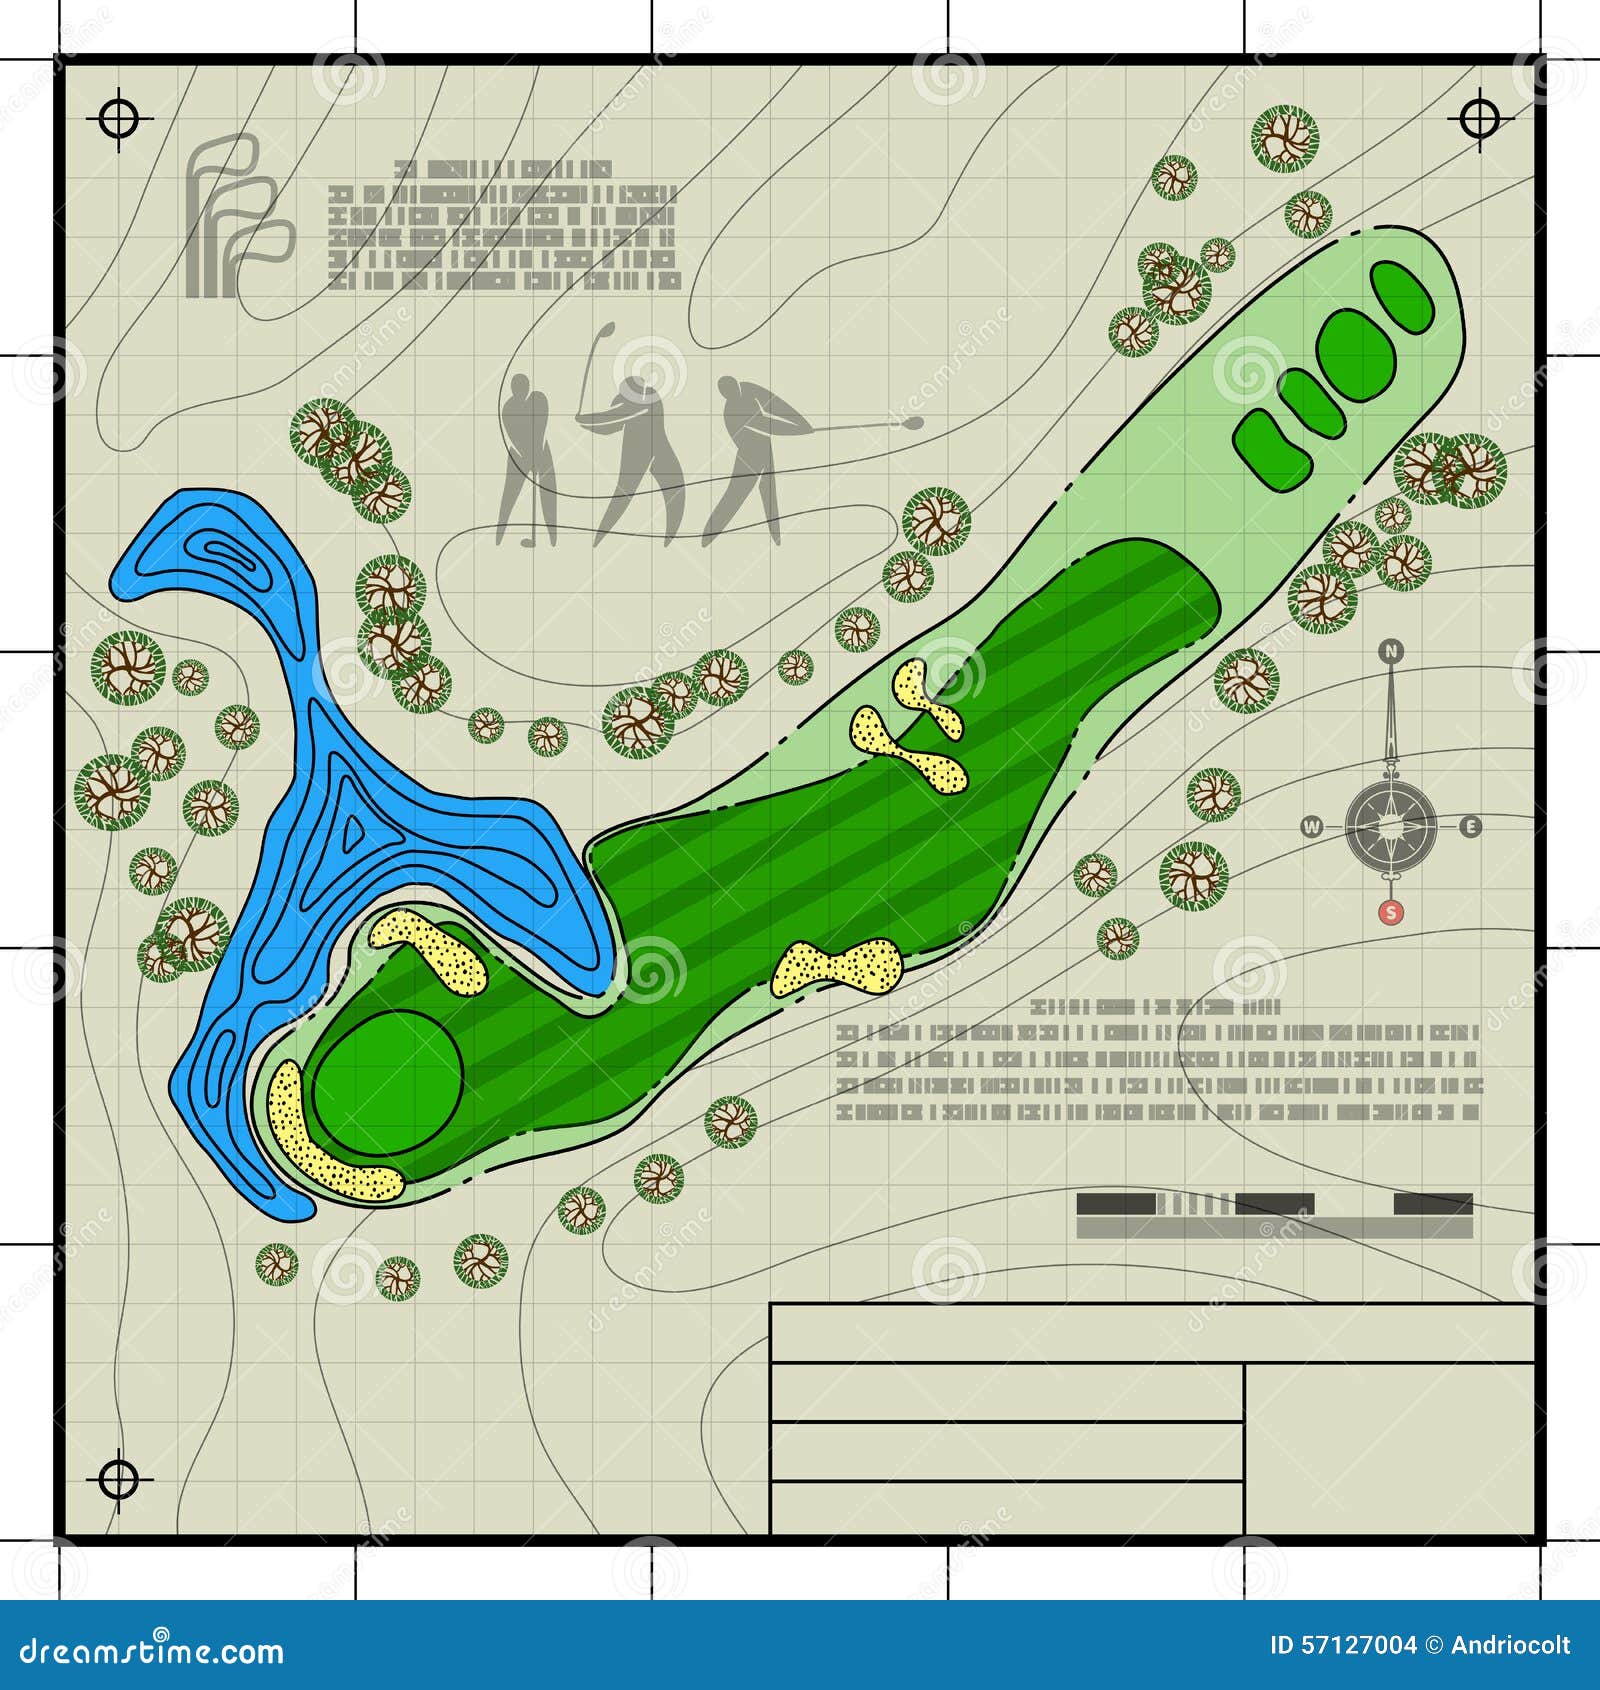 golf course layout blueprint drawing